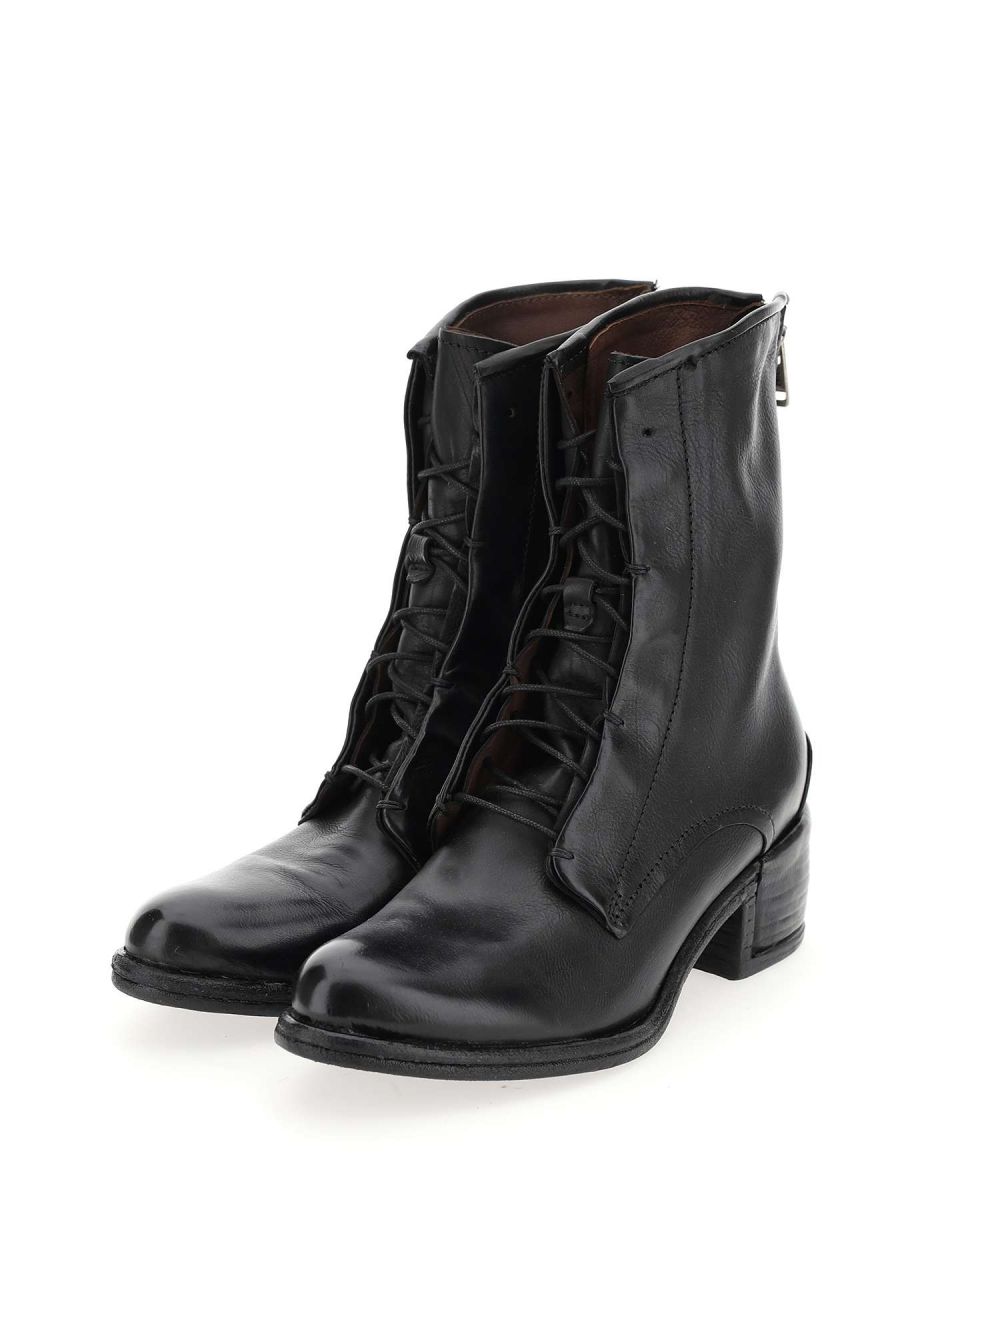 AS98 OPEA 548202 ANKLE BOOTS NERO